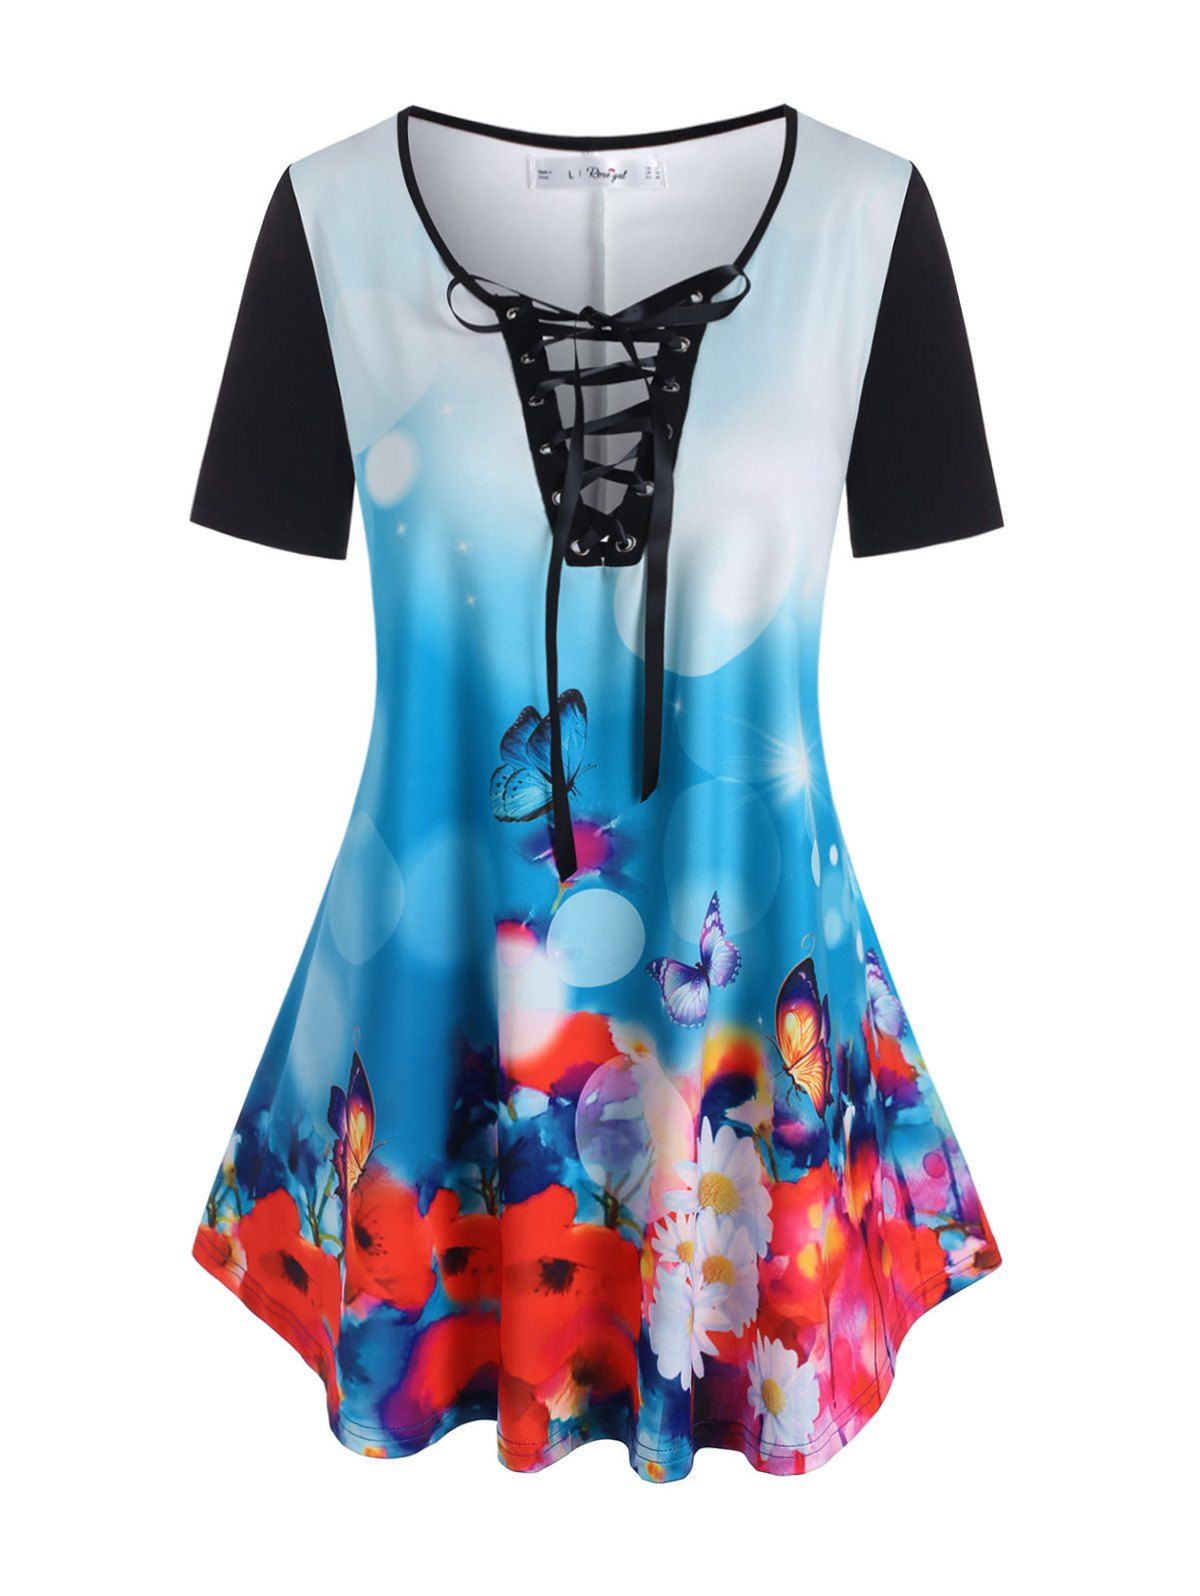 Plus Size Lace-up Ombre Butterfly Flower Print Tunic Tee - BLACK L